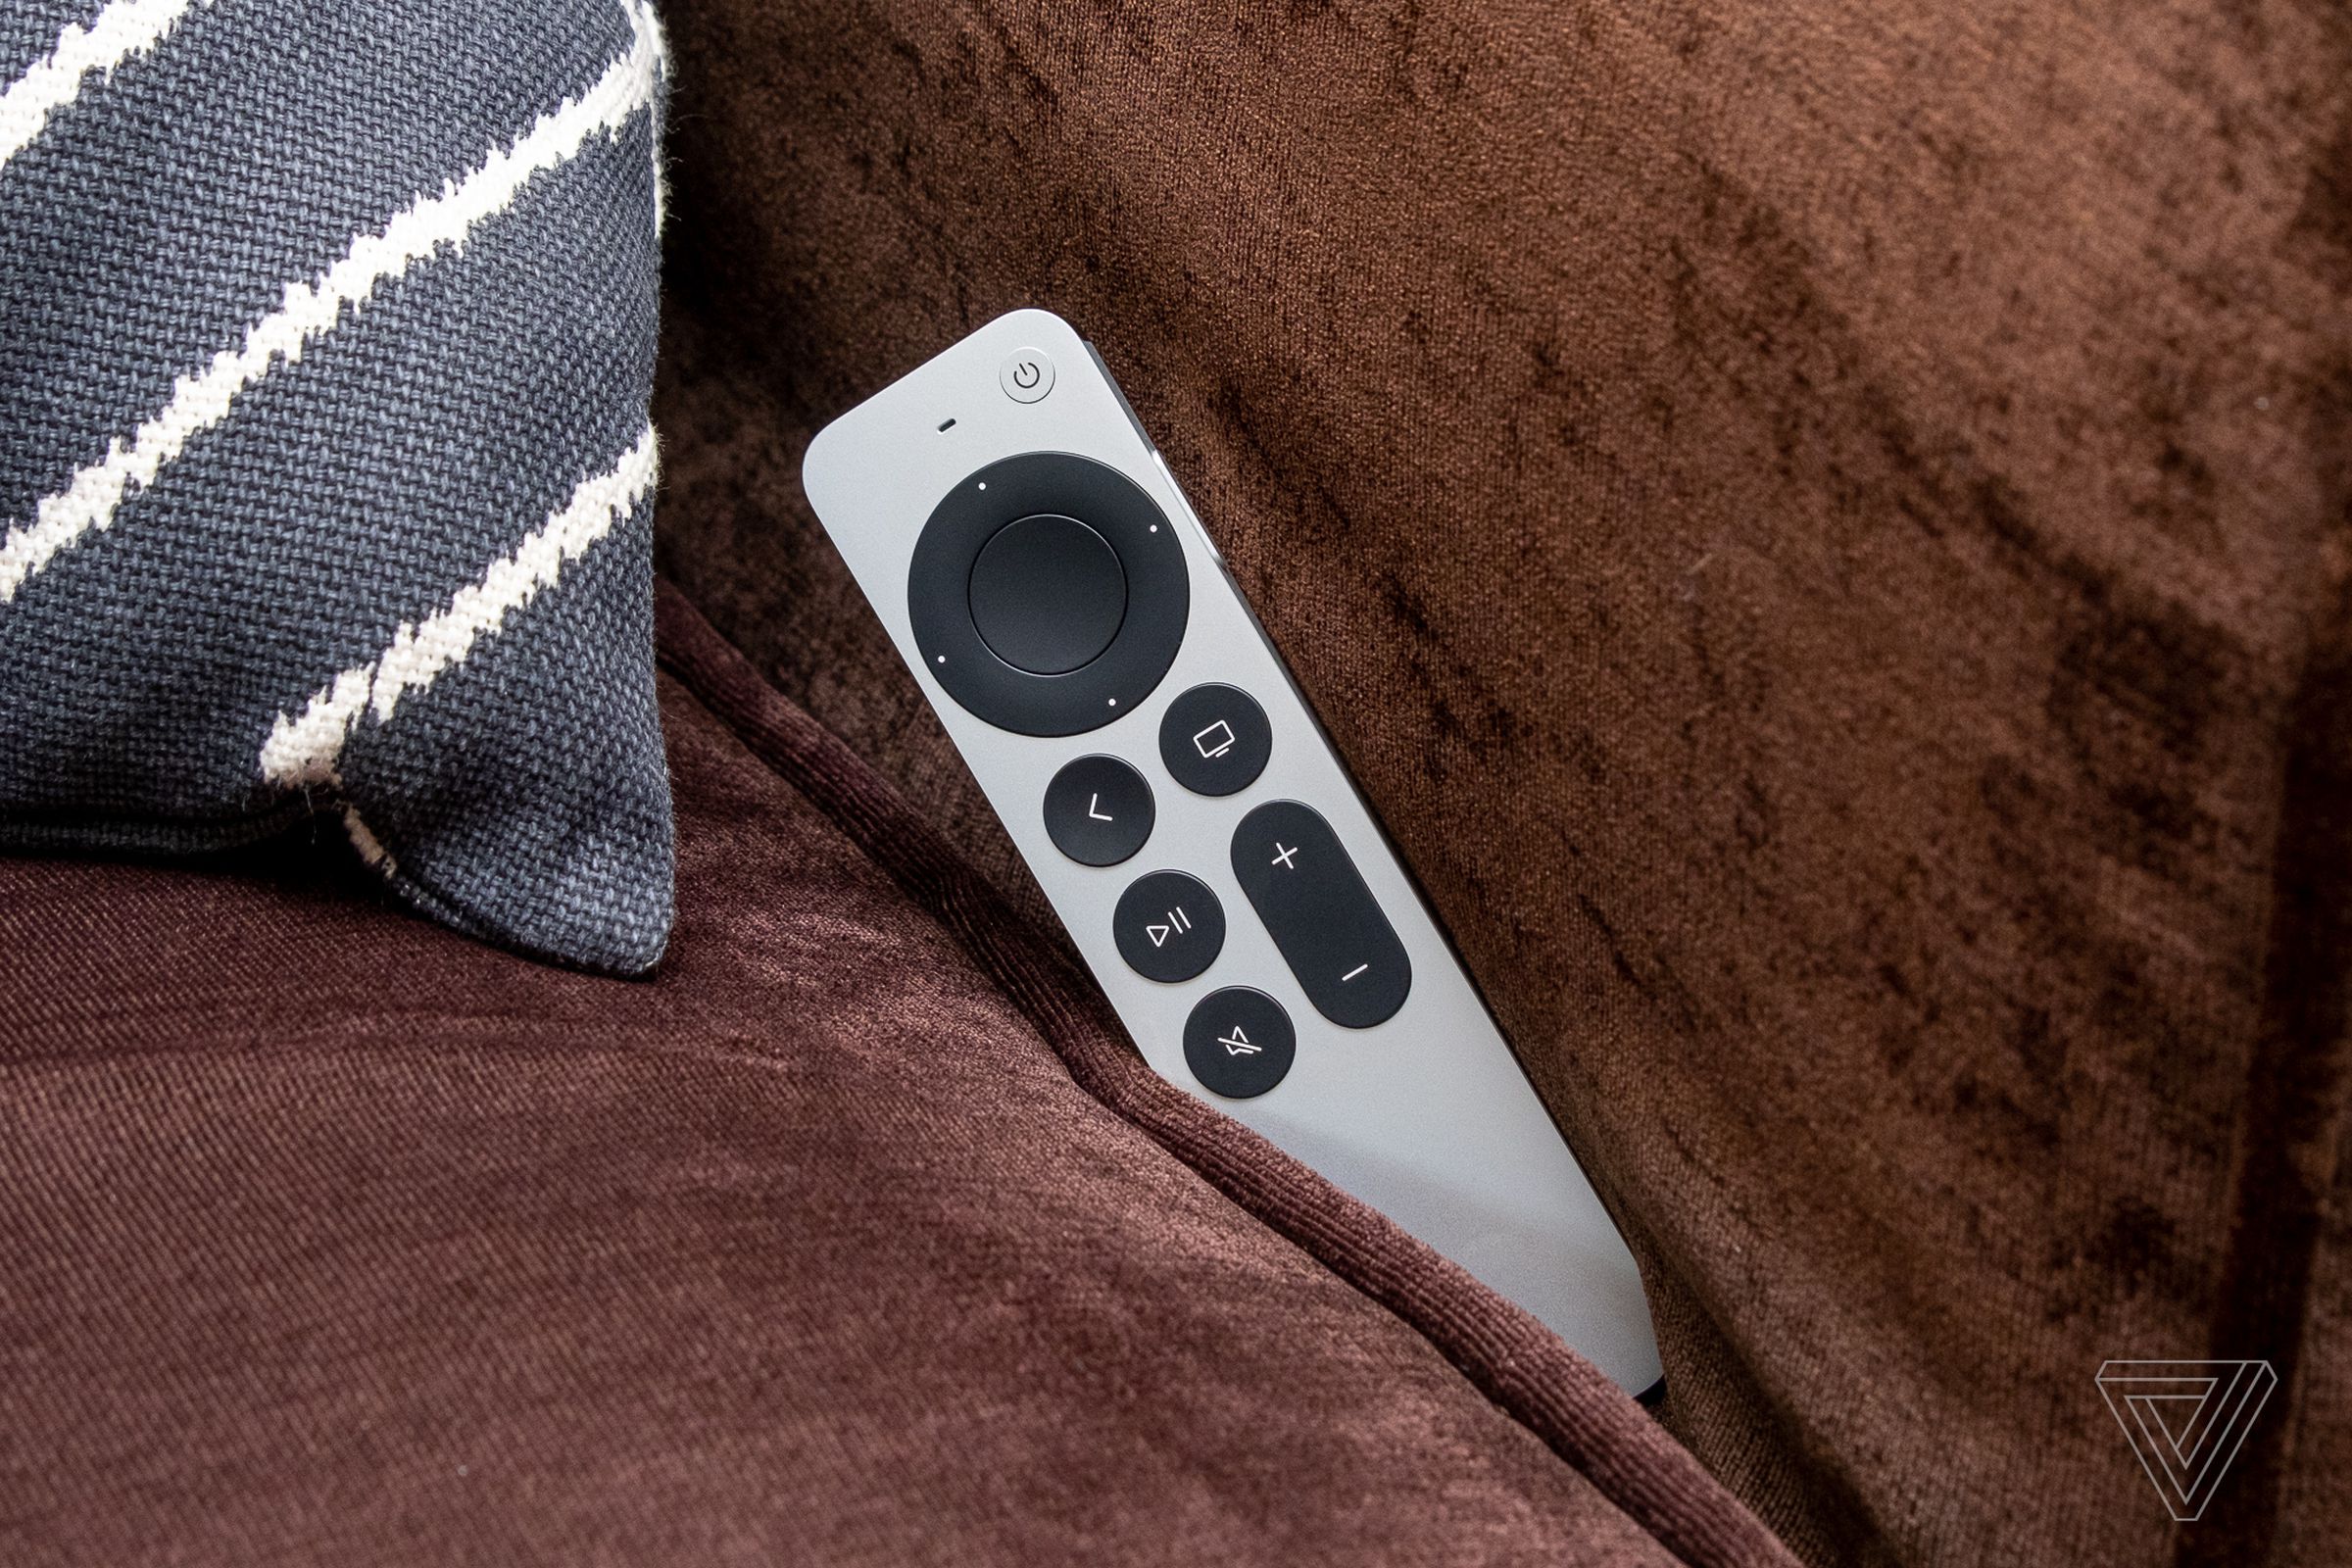 A photo of the Apple TV remote wedged into a couch.